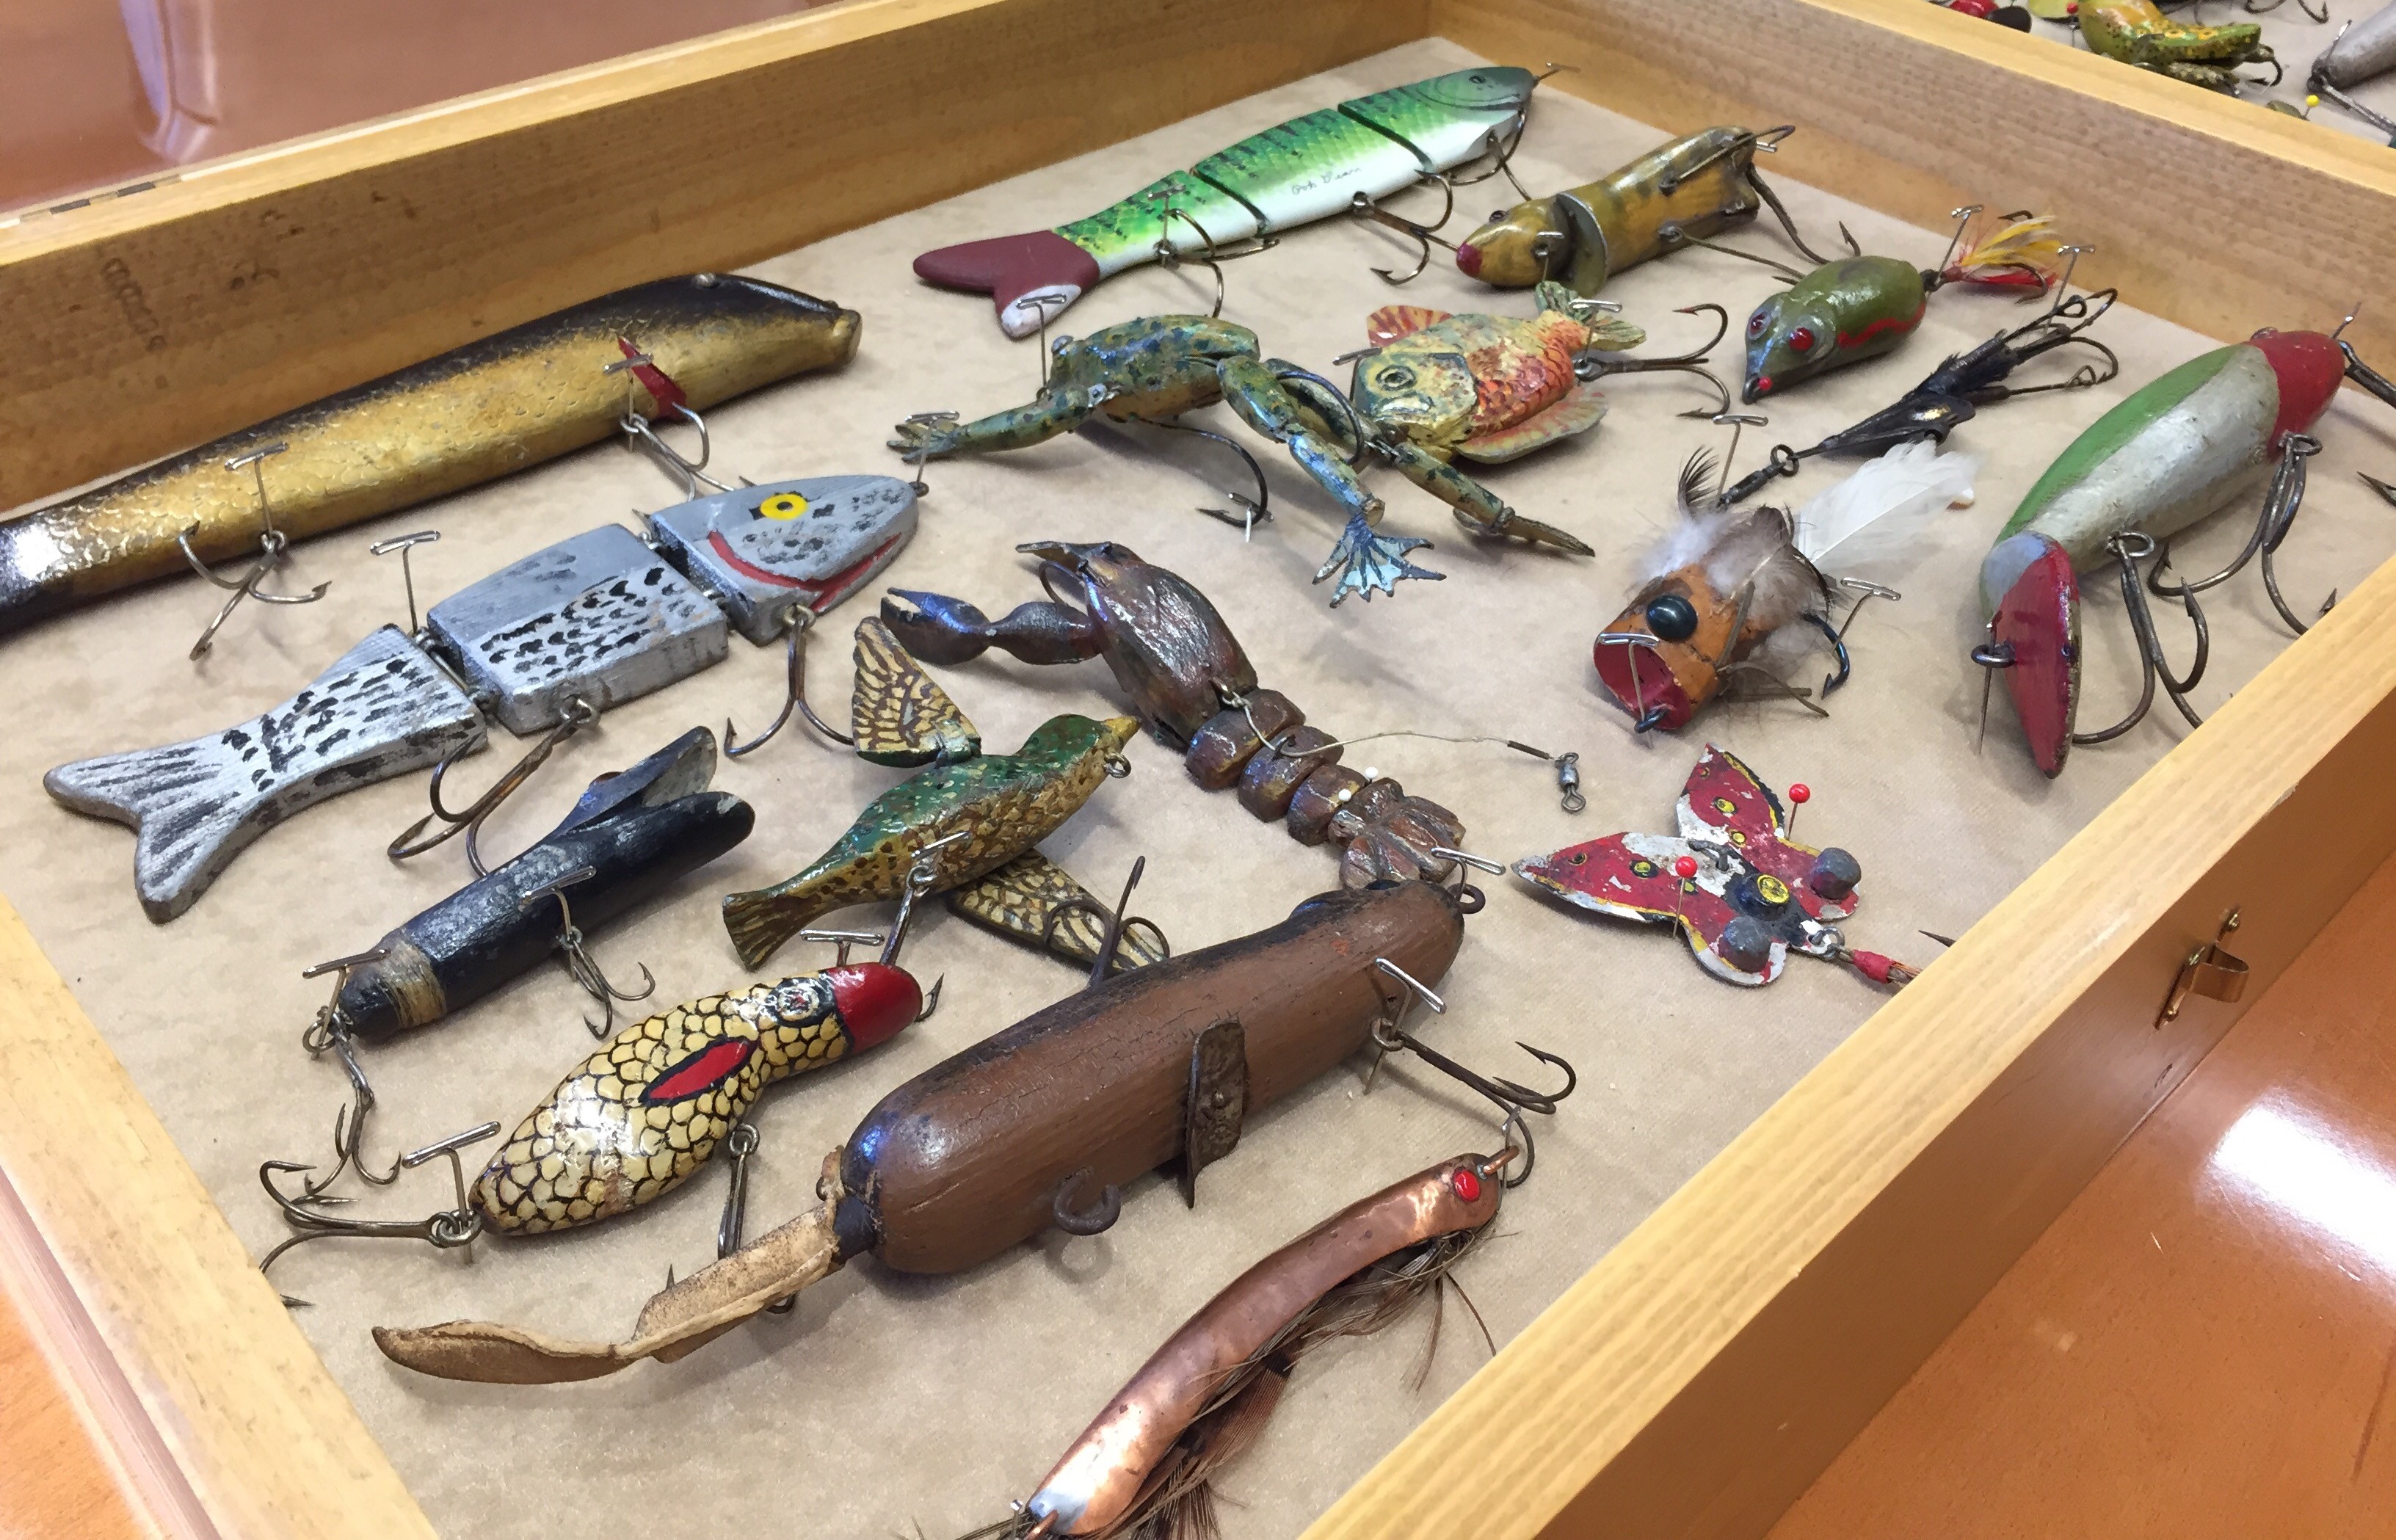 Doctor's collection of fishing lures a popular point of interest